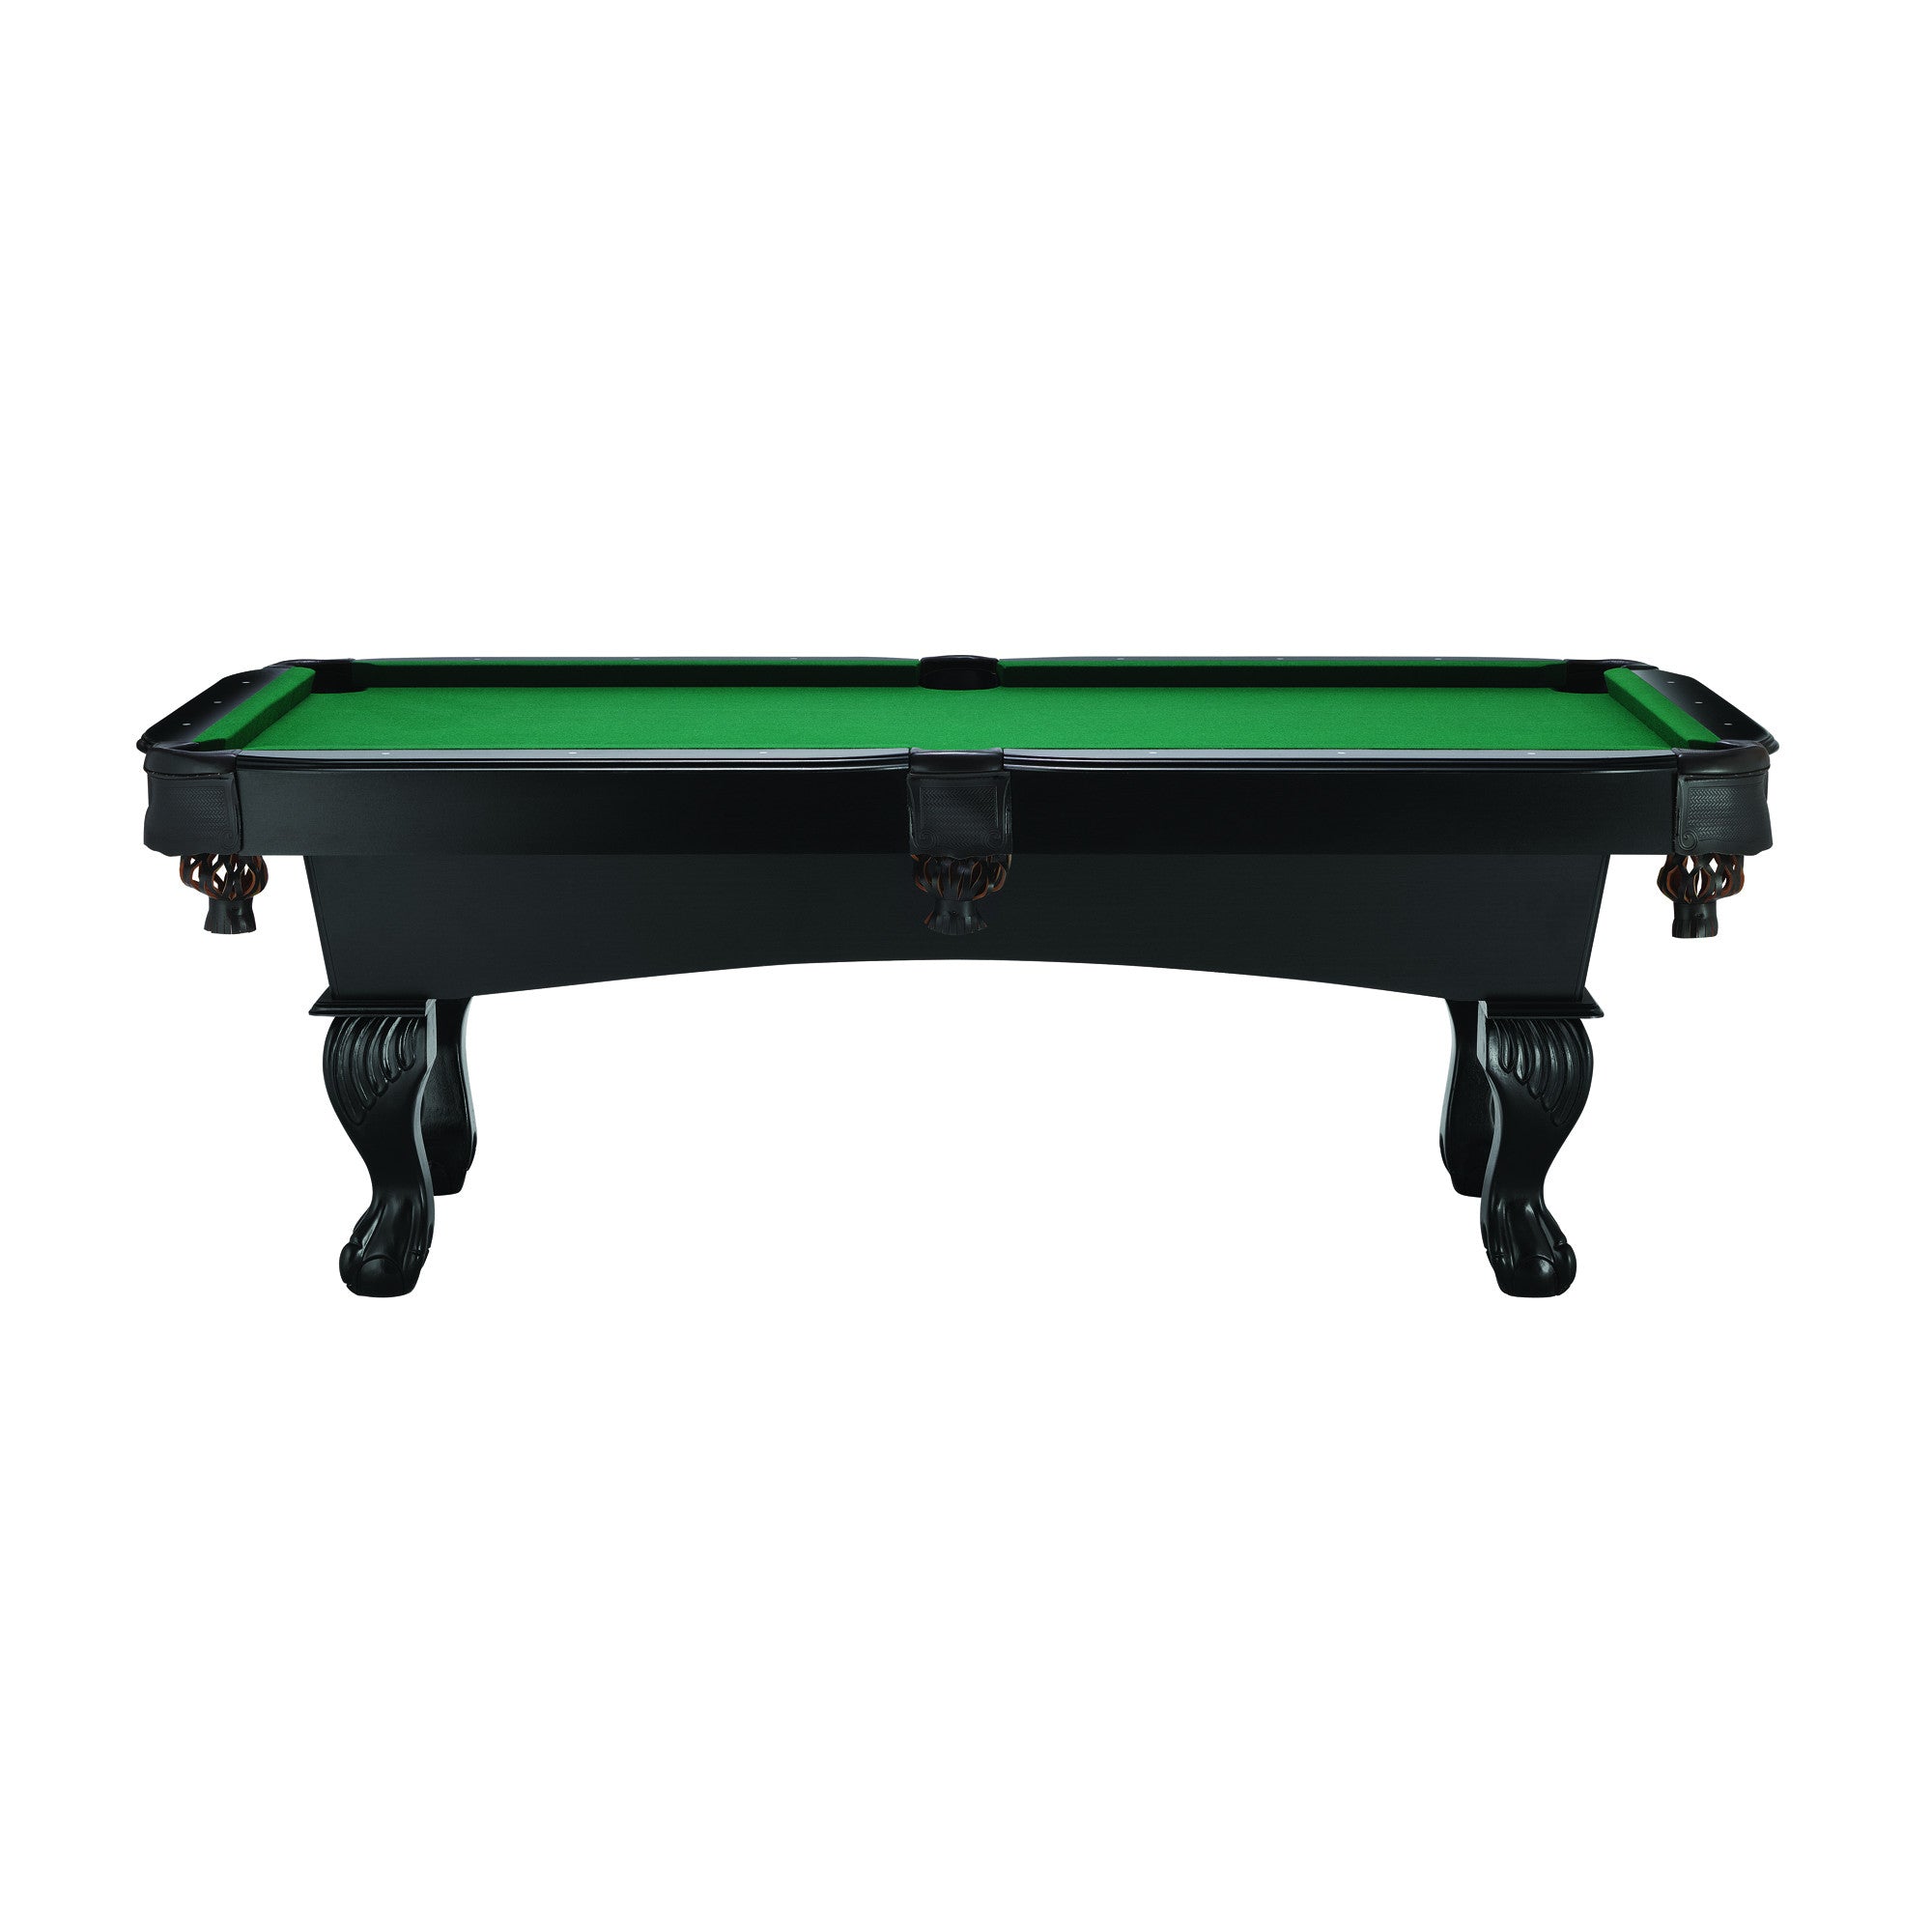 7ft slate pool table for sale